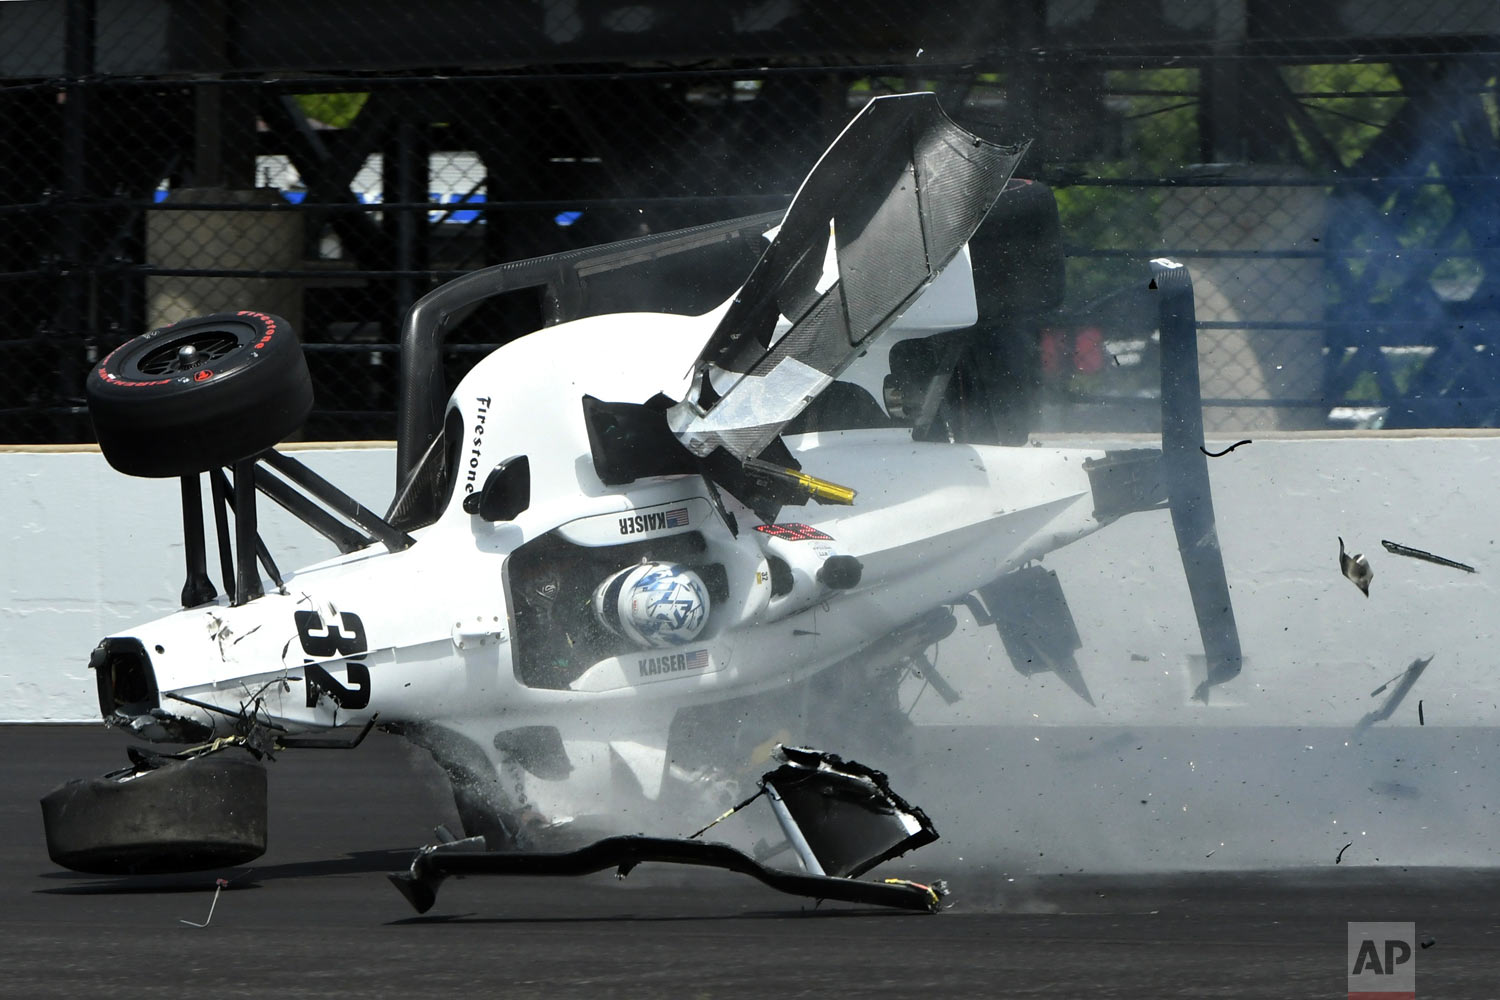  The car driven by Kyle Kaiser goes airborne after hitting the wall along the third turn during practice for the Indianapolis 500 IndyCar auto race at Indianapolis Motor Speedway, Friday, May 17, 2019 in Indianapolis. (AP Photo/Tom Pyle) 